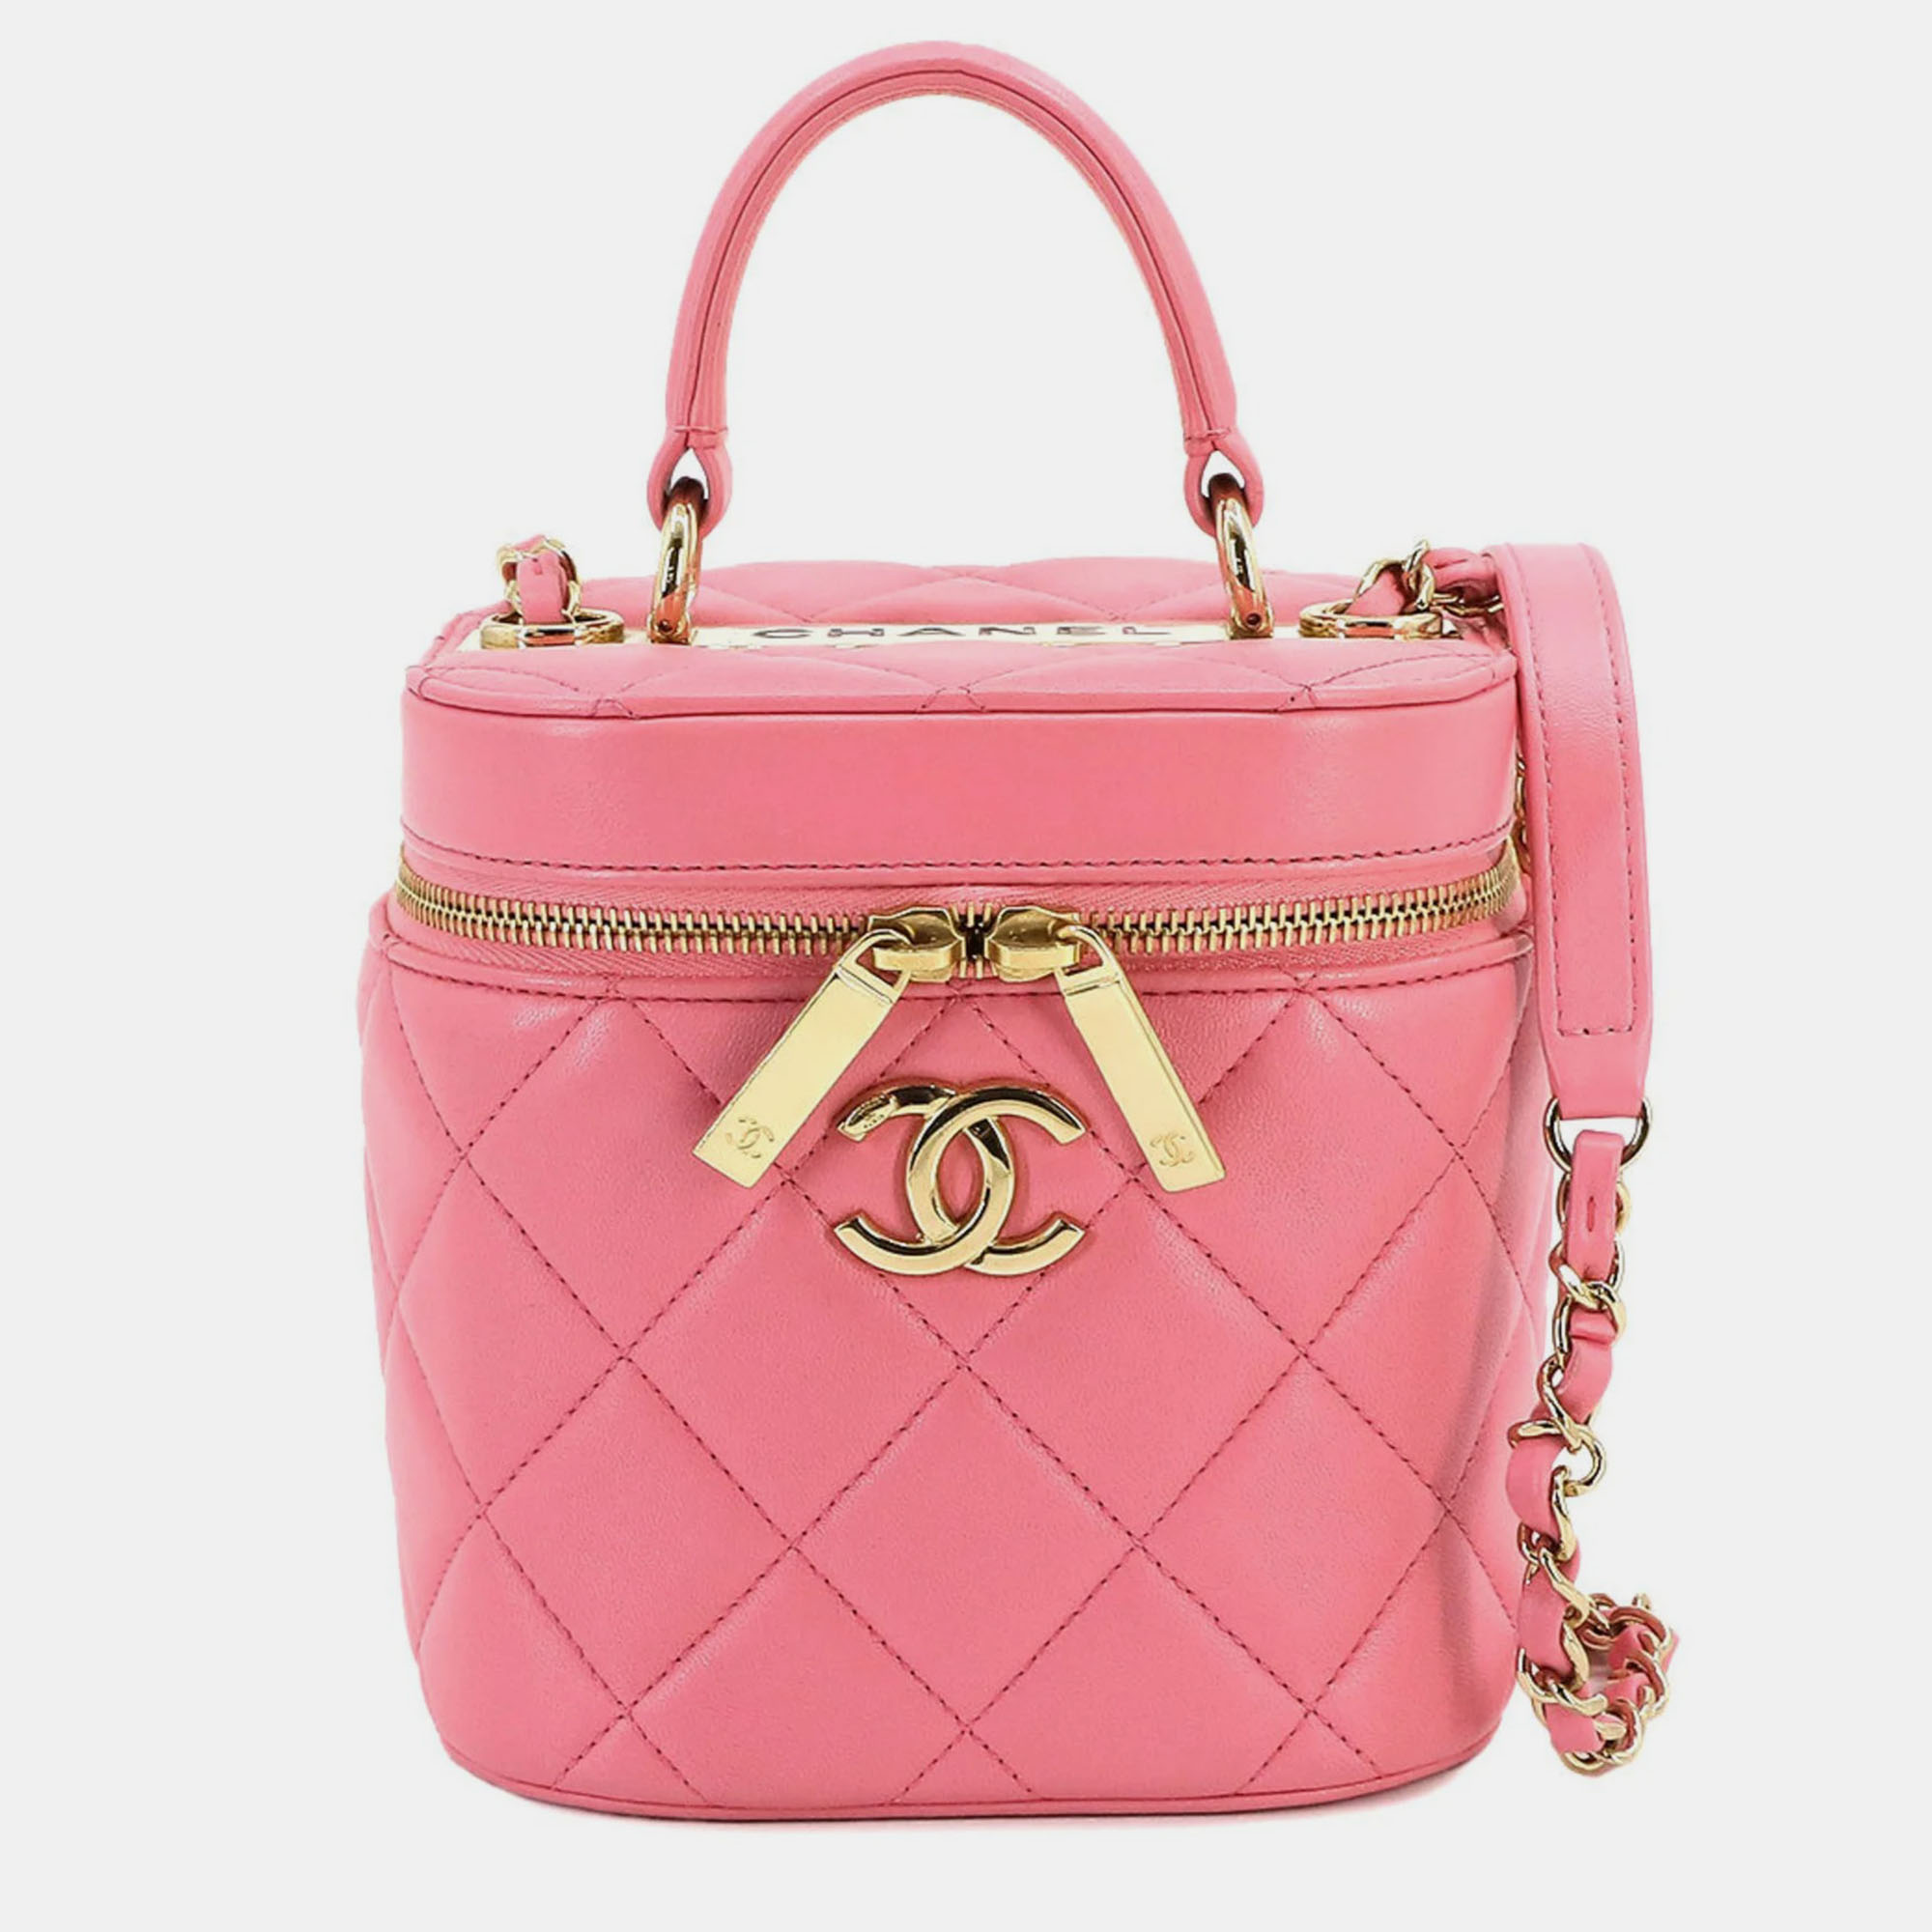 Chanel pink leather  trendy cc shoulder bags